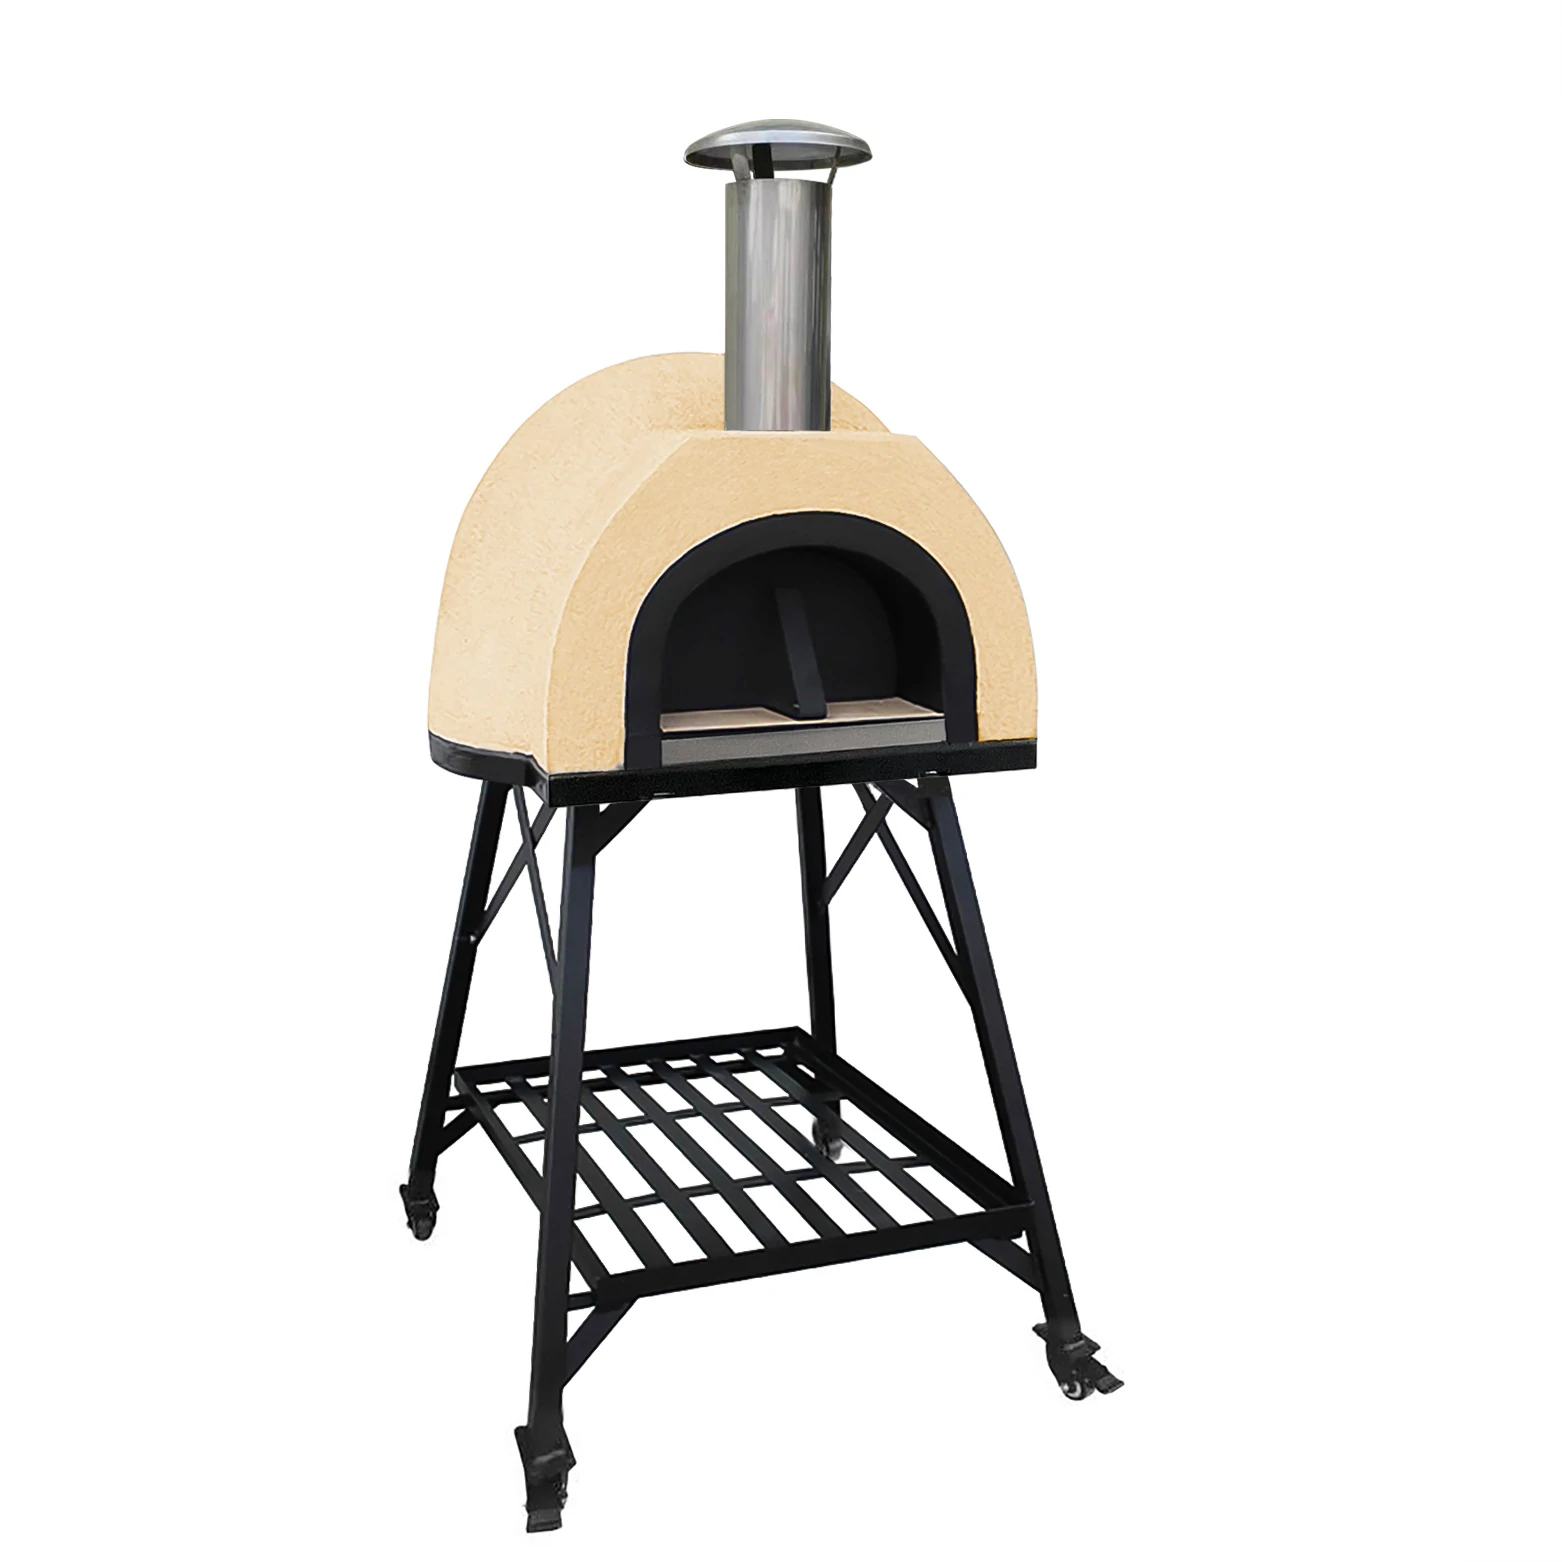 Forno Piombo Santino Adobe with Stand